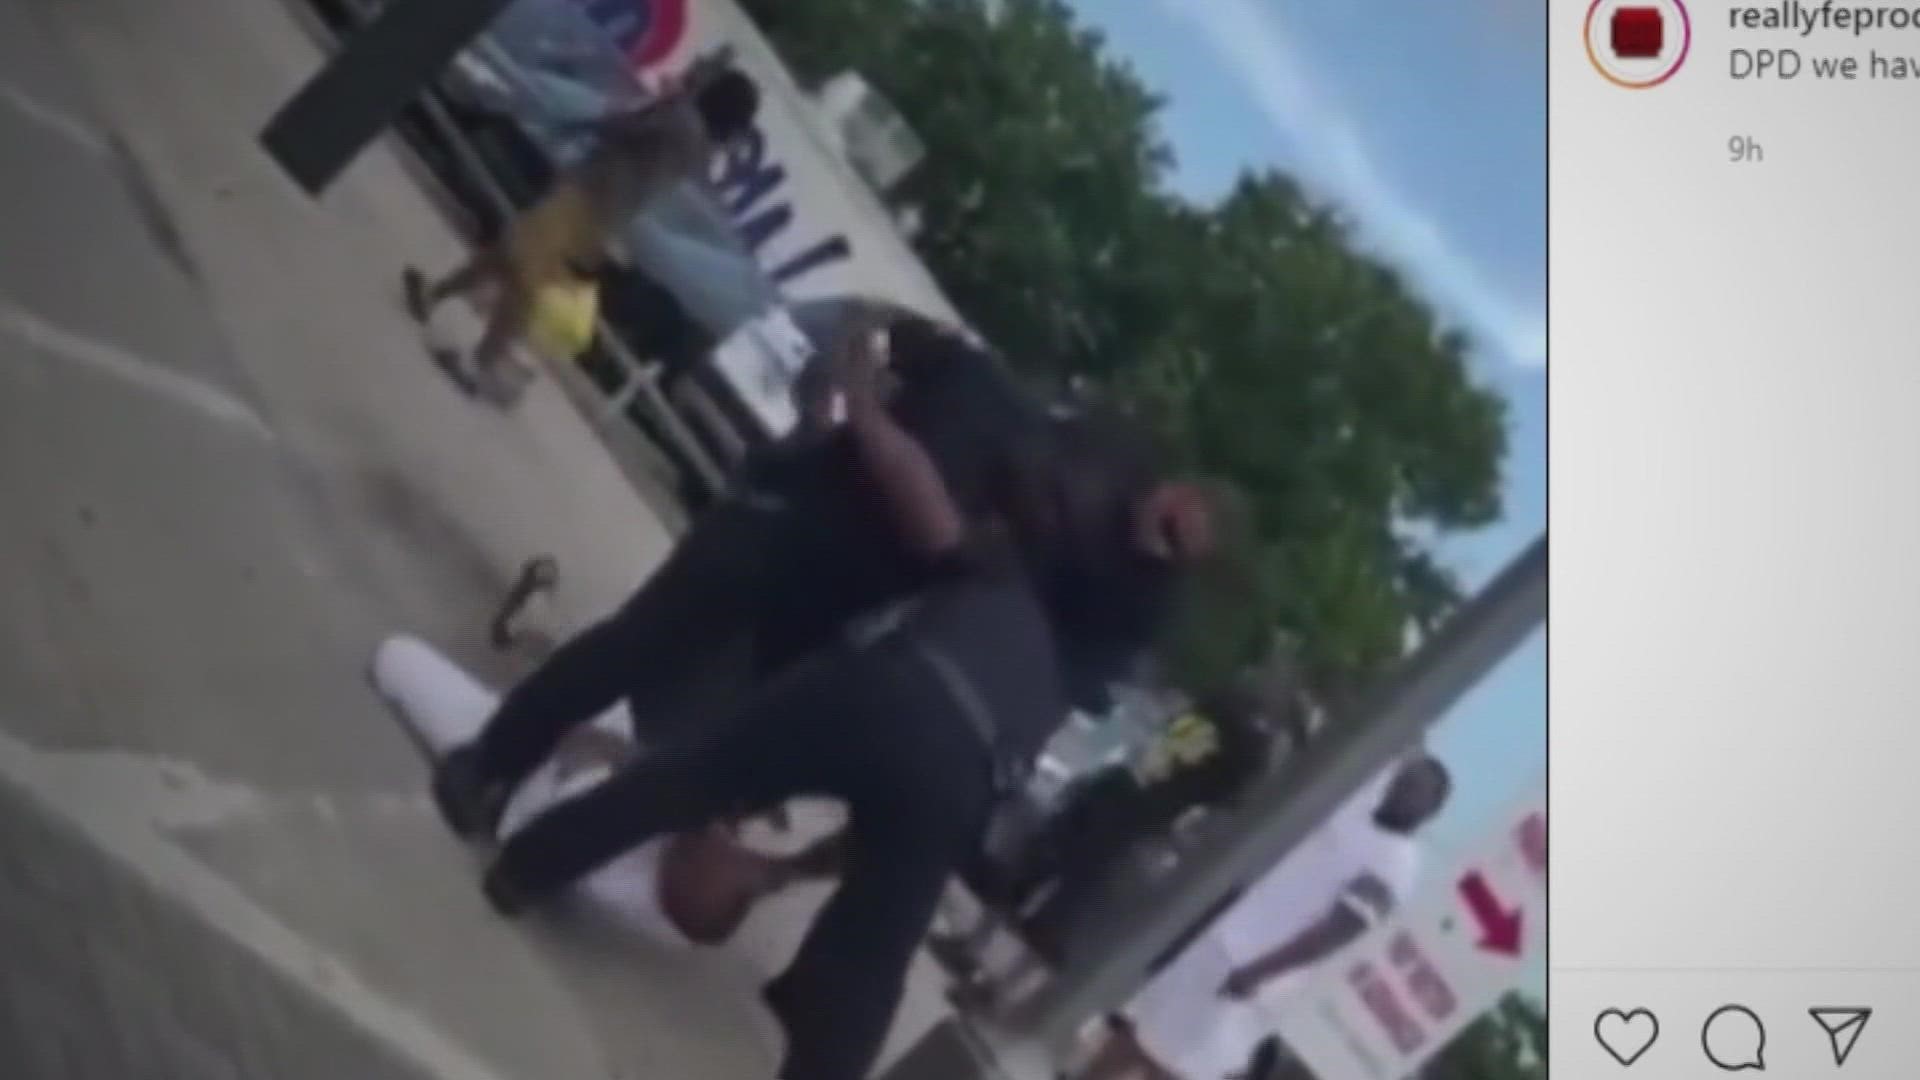 A Dallas police officer was placed on administrative leave after a video circulating on social media shows the officer punching a man several times on the ground.